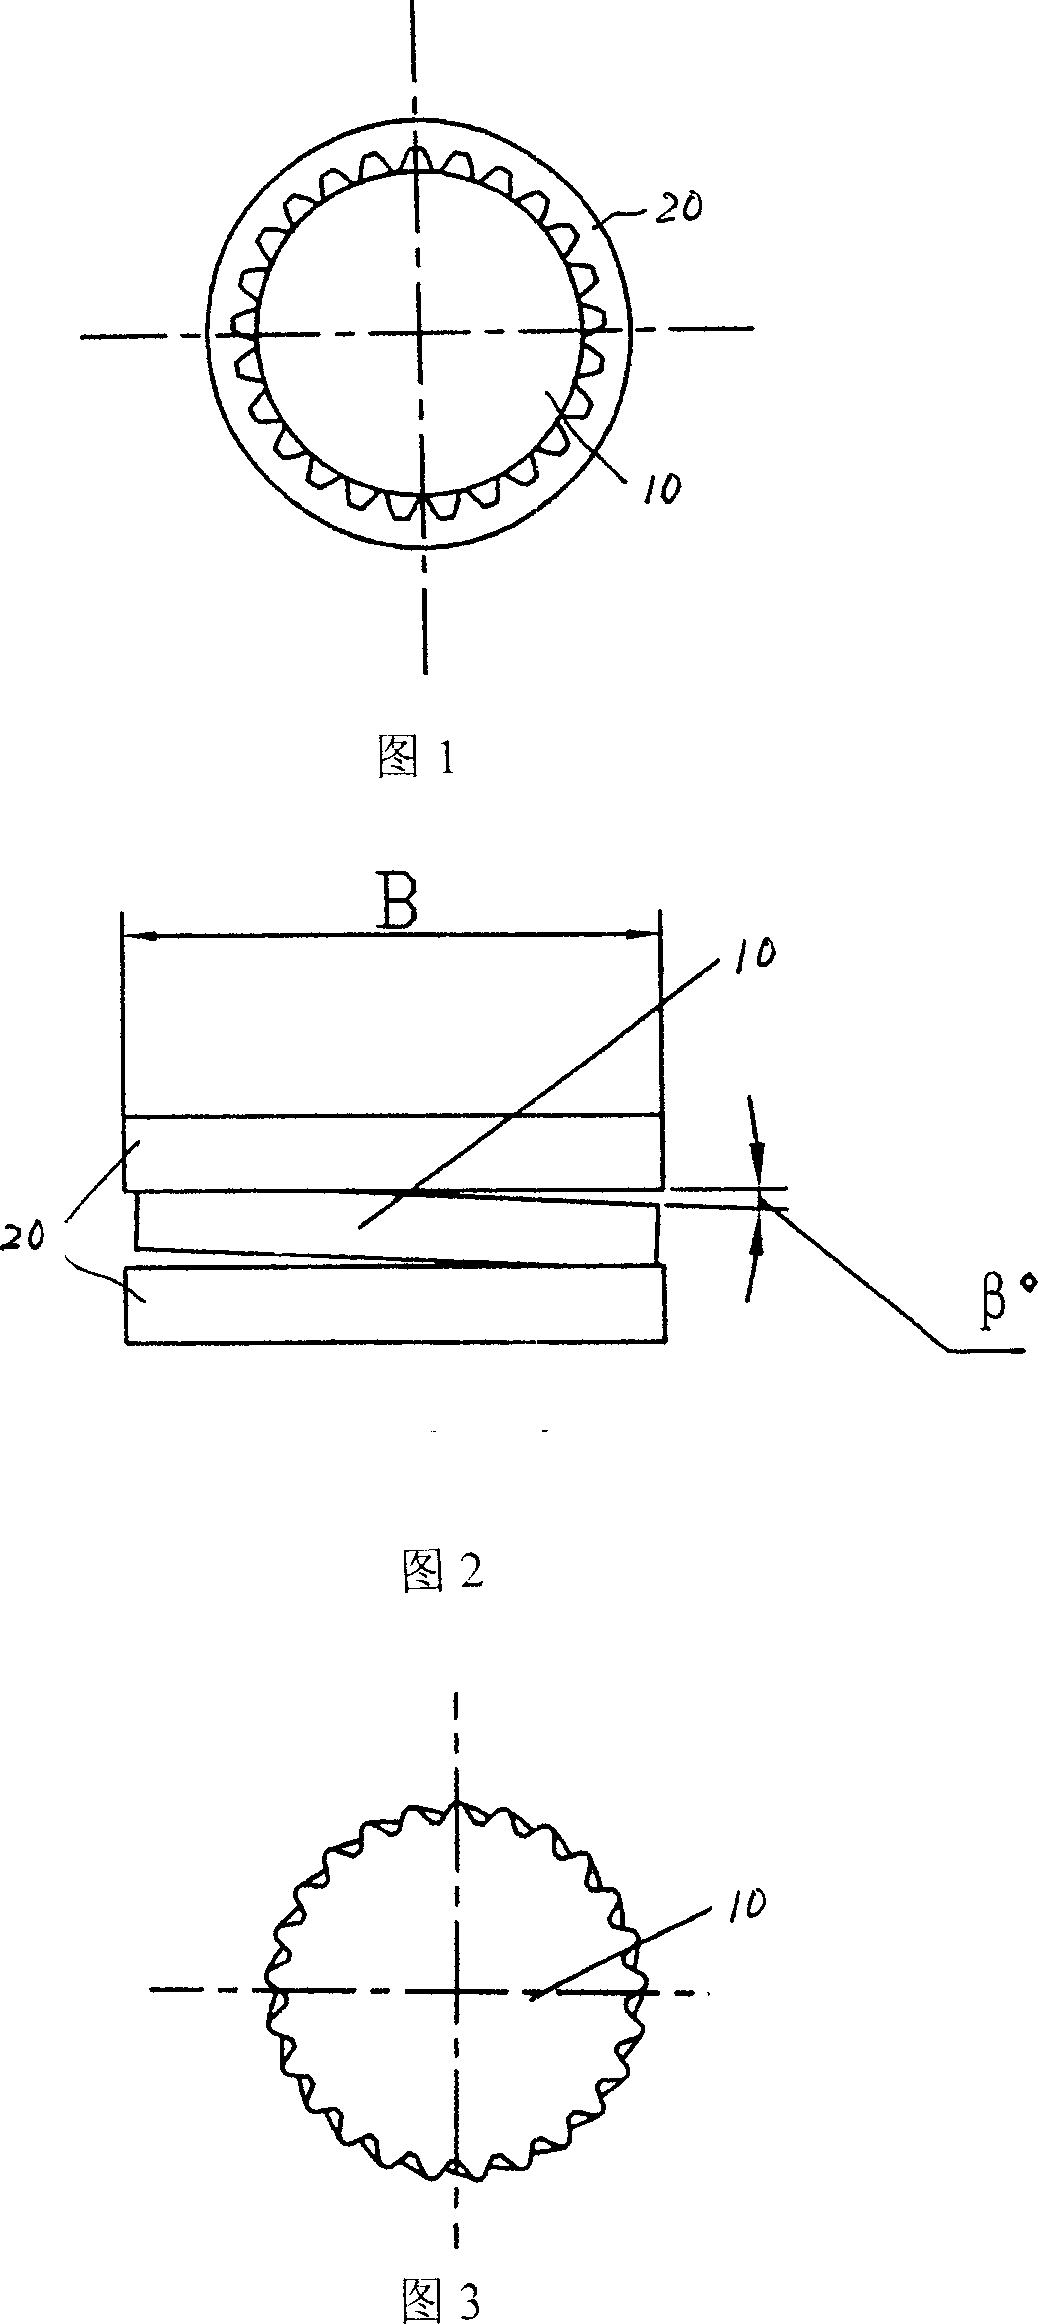 Connector for transfer heavy load